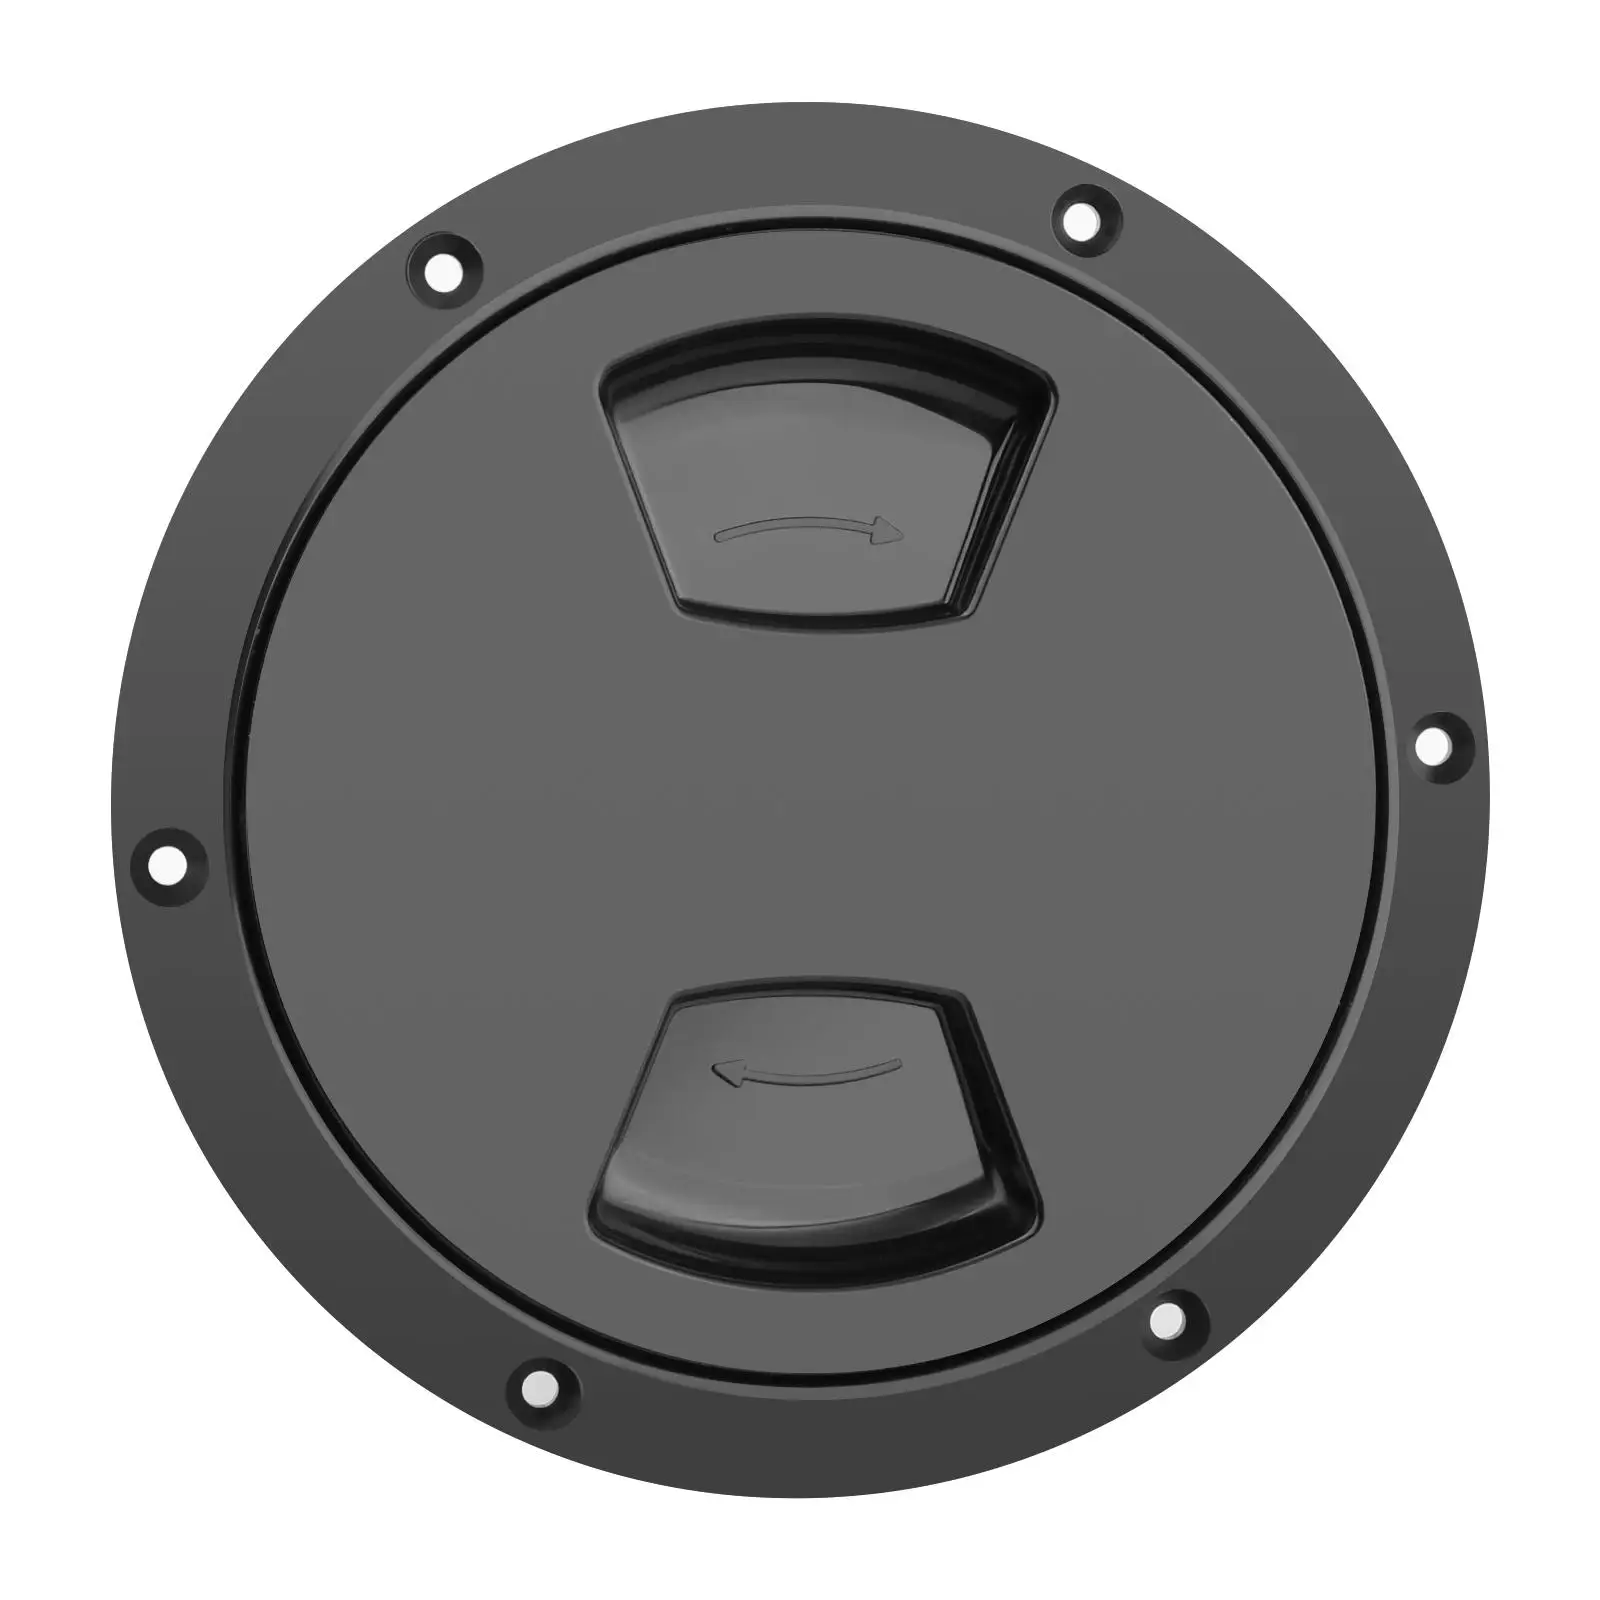 New Marine Boat Black 5inch Access Hatch Cover Twist Screw Out Deck Plate